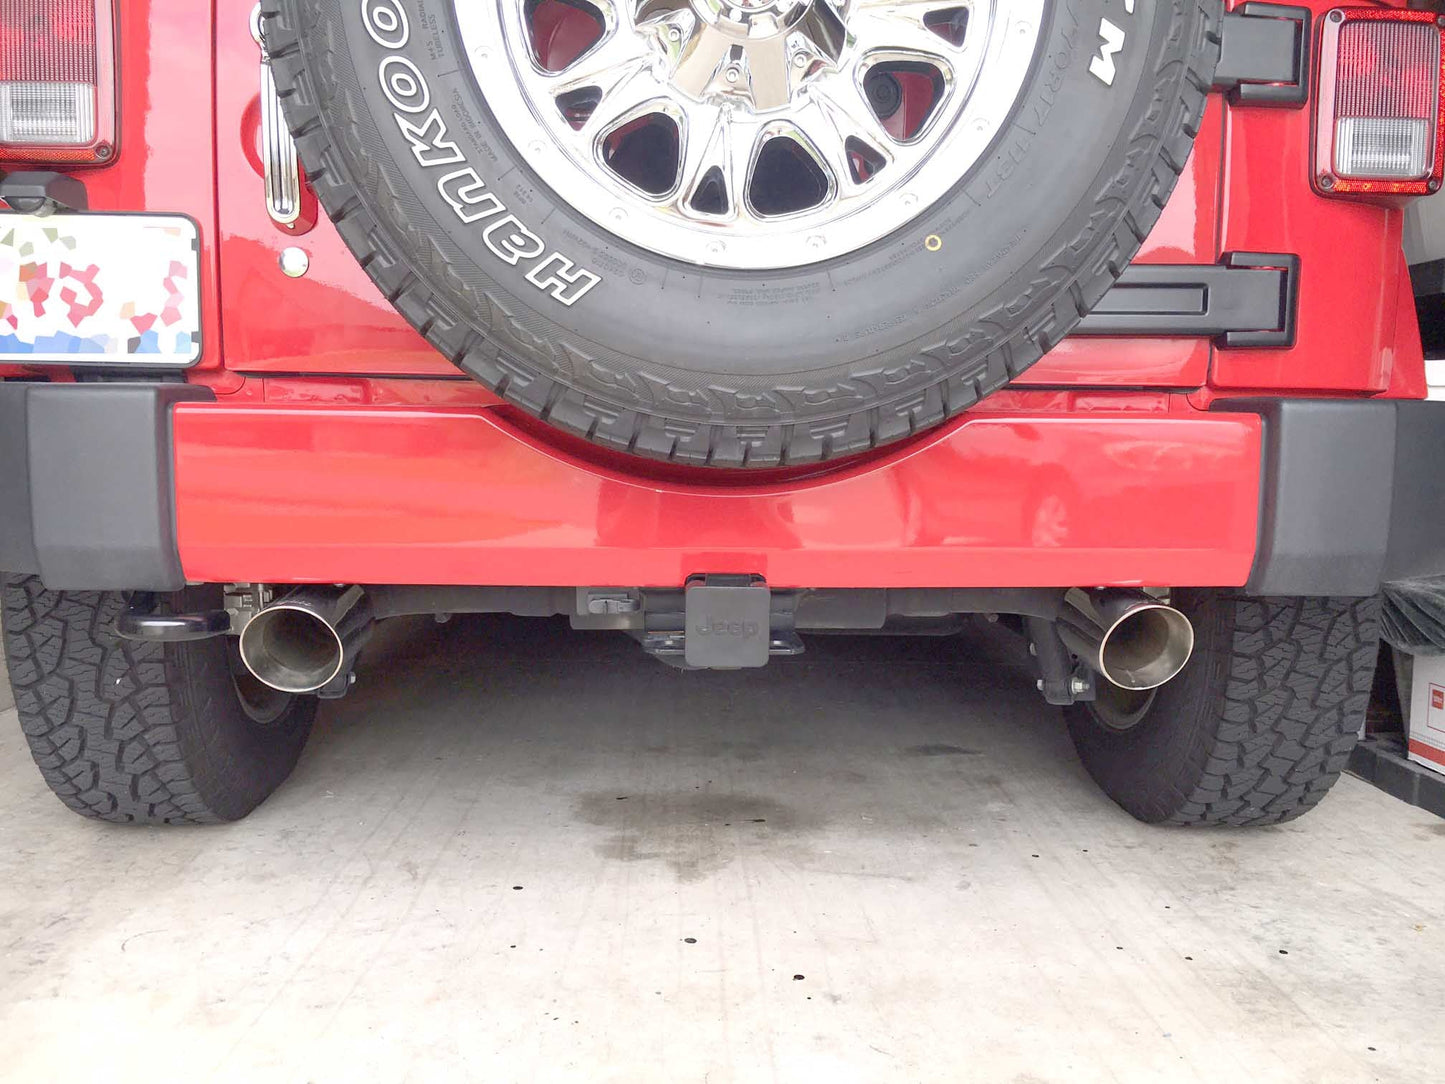 LEX4160 - 2007-18' Jeep Wrangler Axle Back Kit - Professional Products